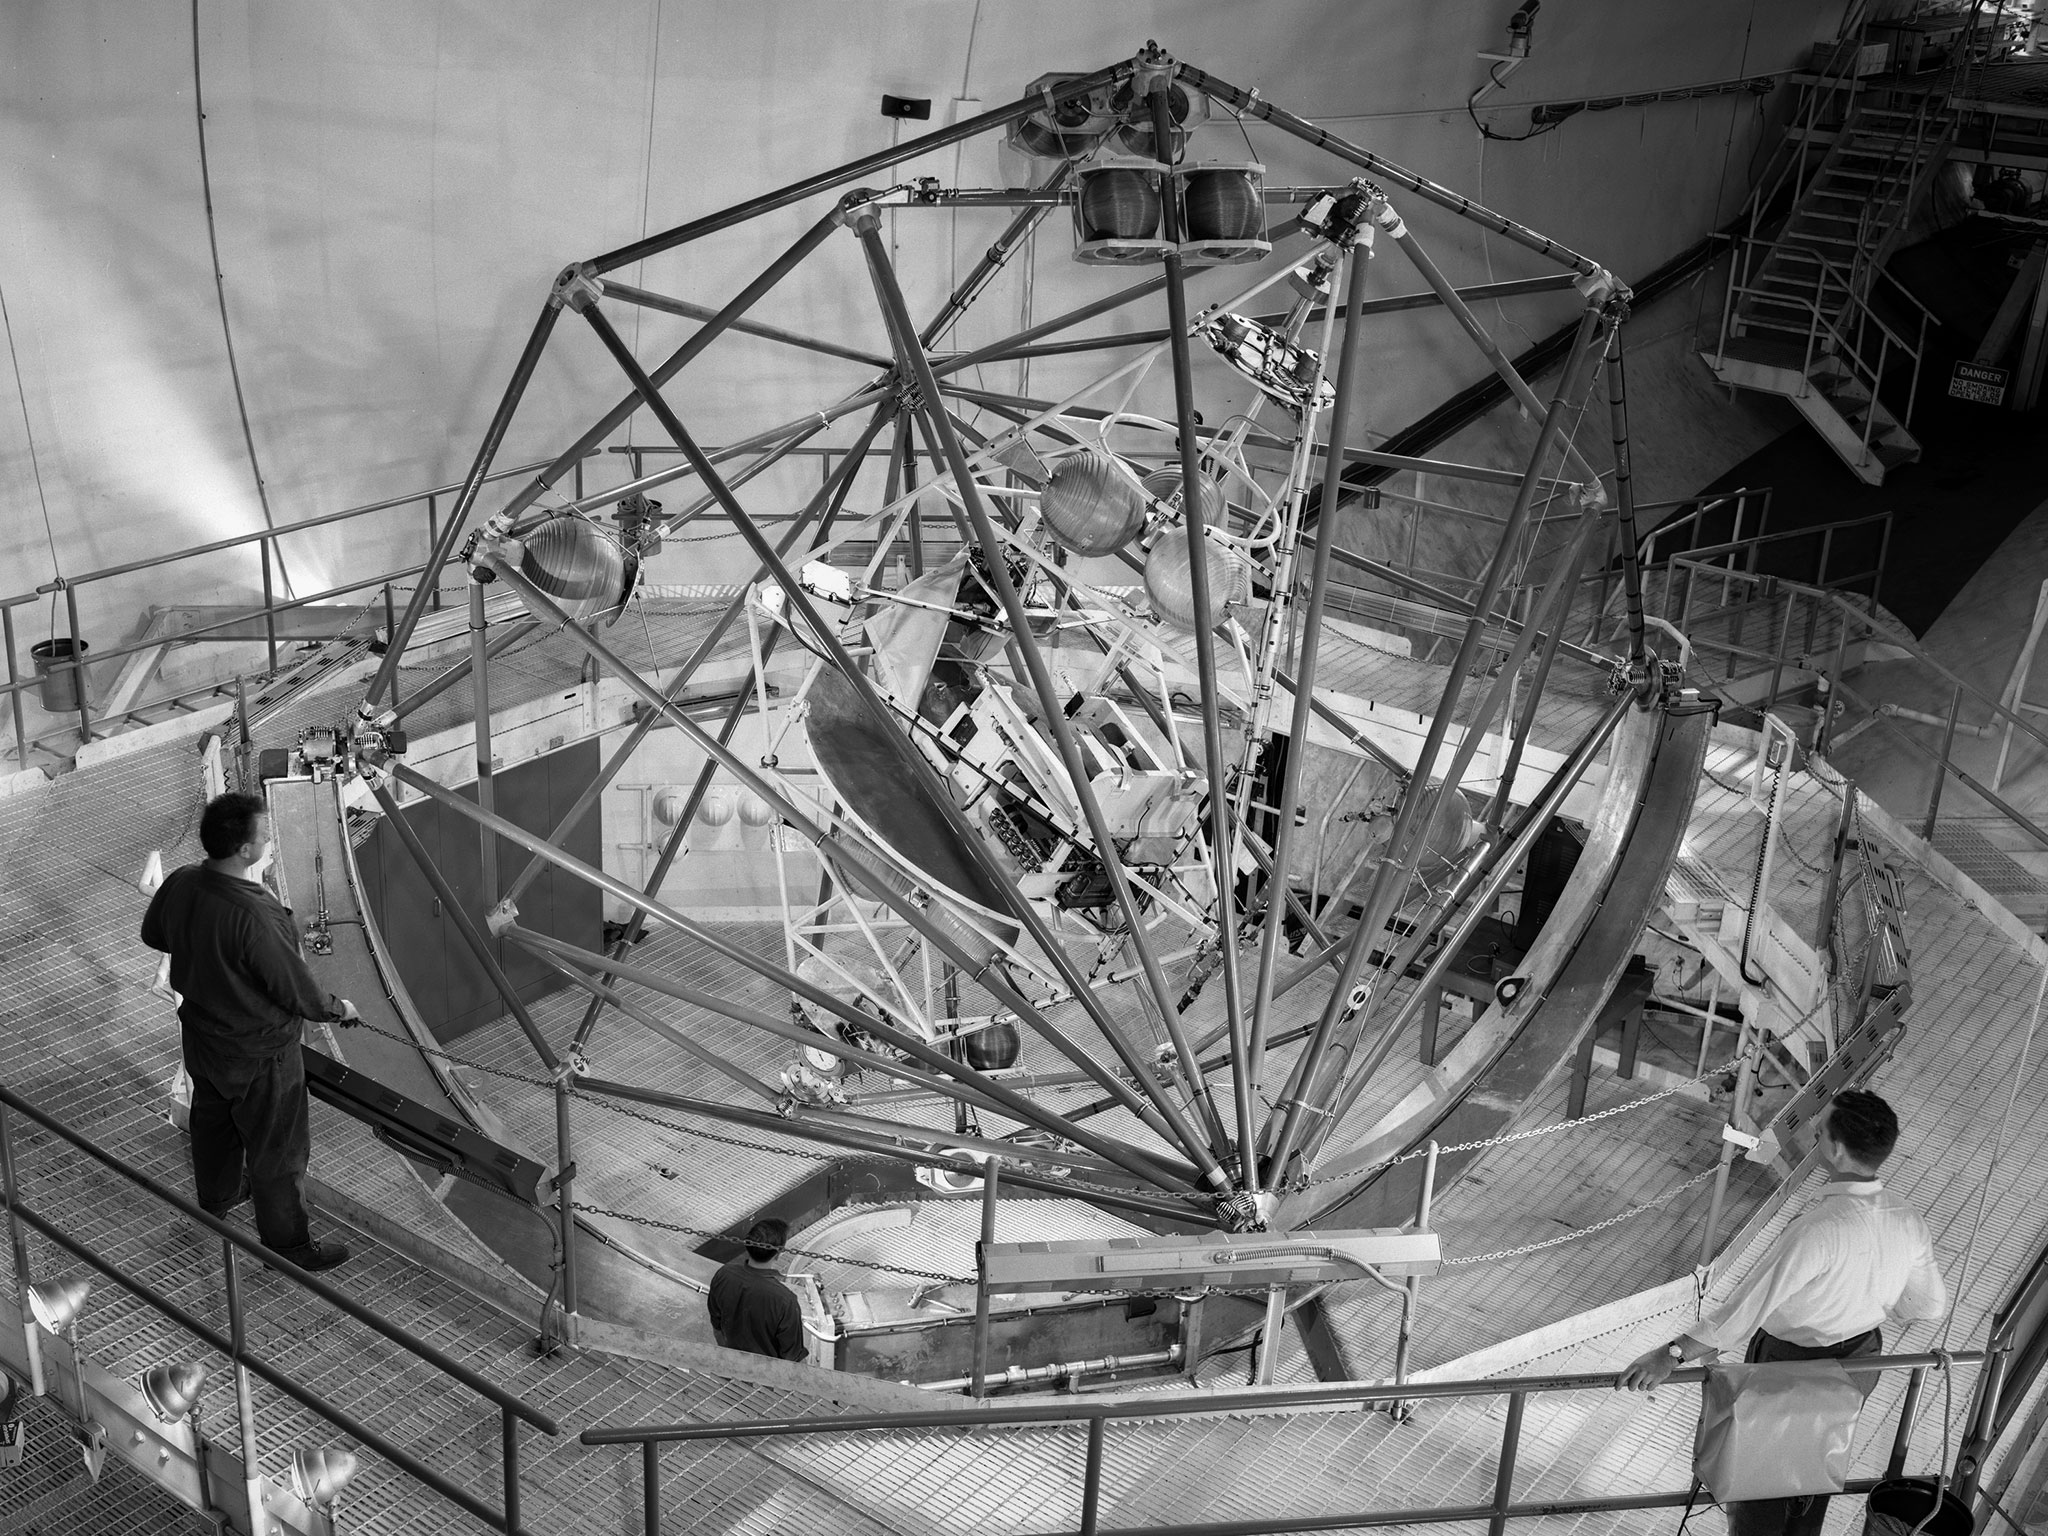 Black and white image of the the Multi Axis Spin Test Inertia Facility device for astronaut training.